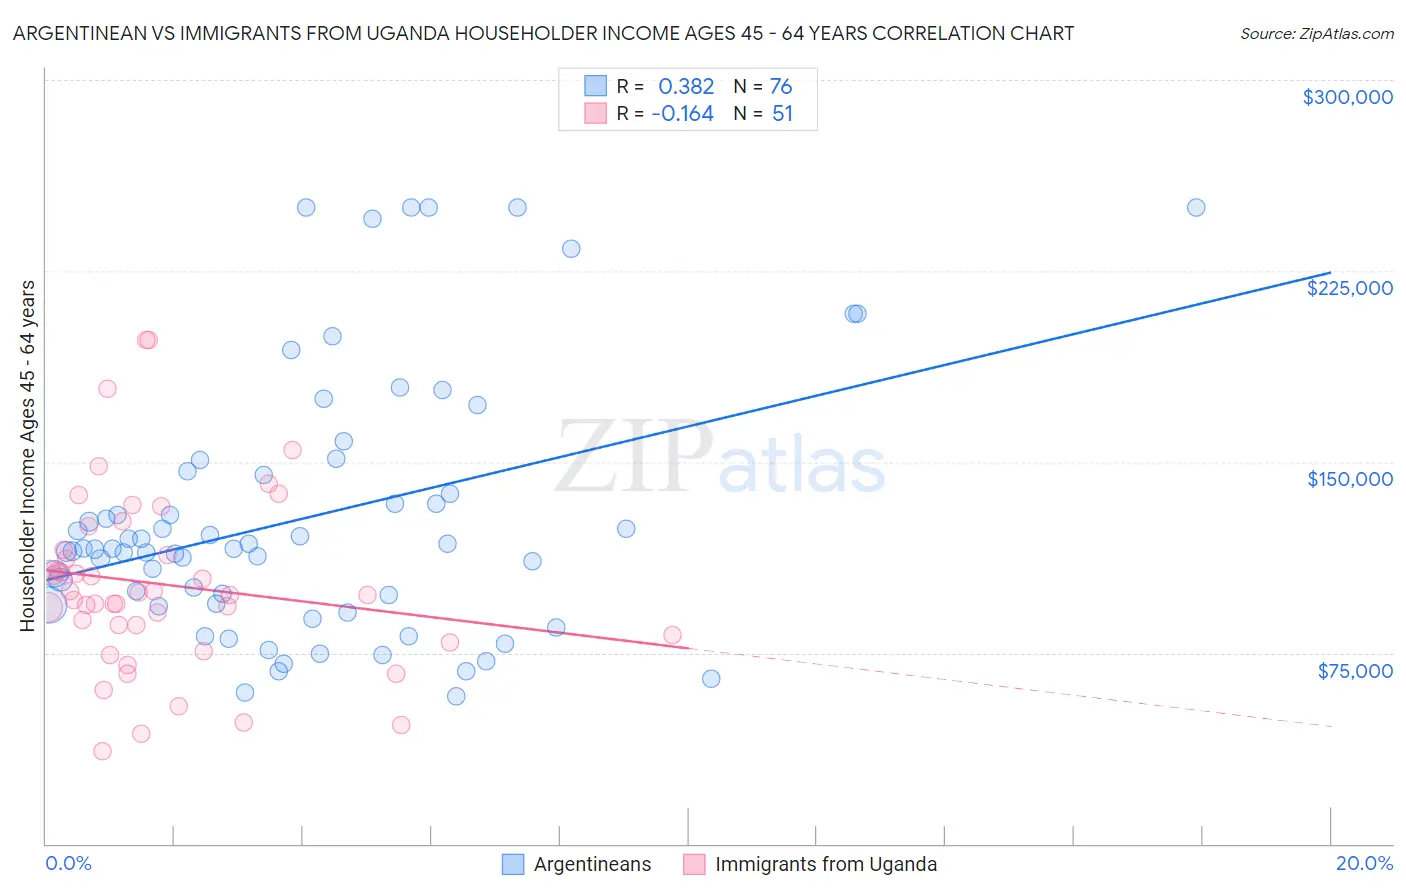 Argentinean vs Immigrants from Uganda Householder Income Ages 45 - 64 years